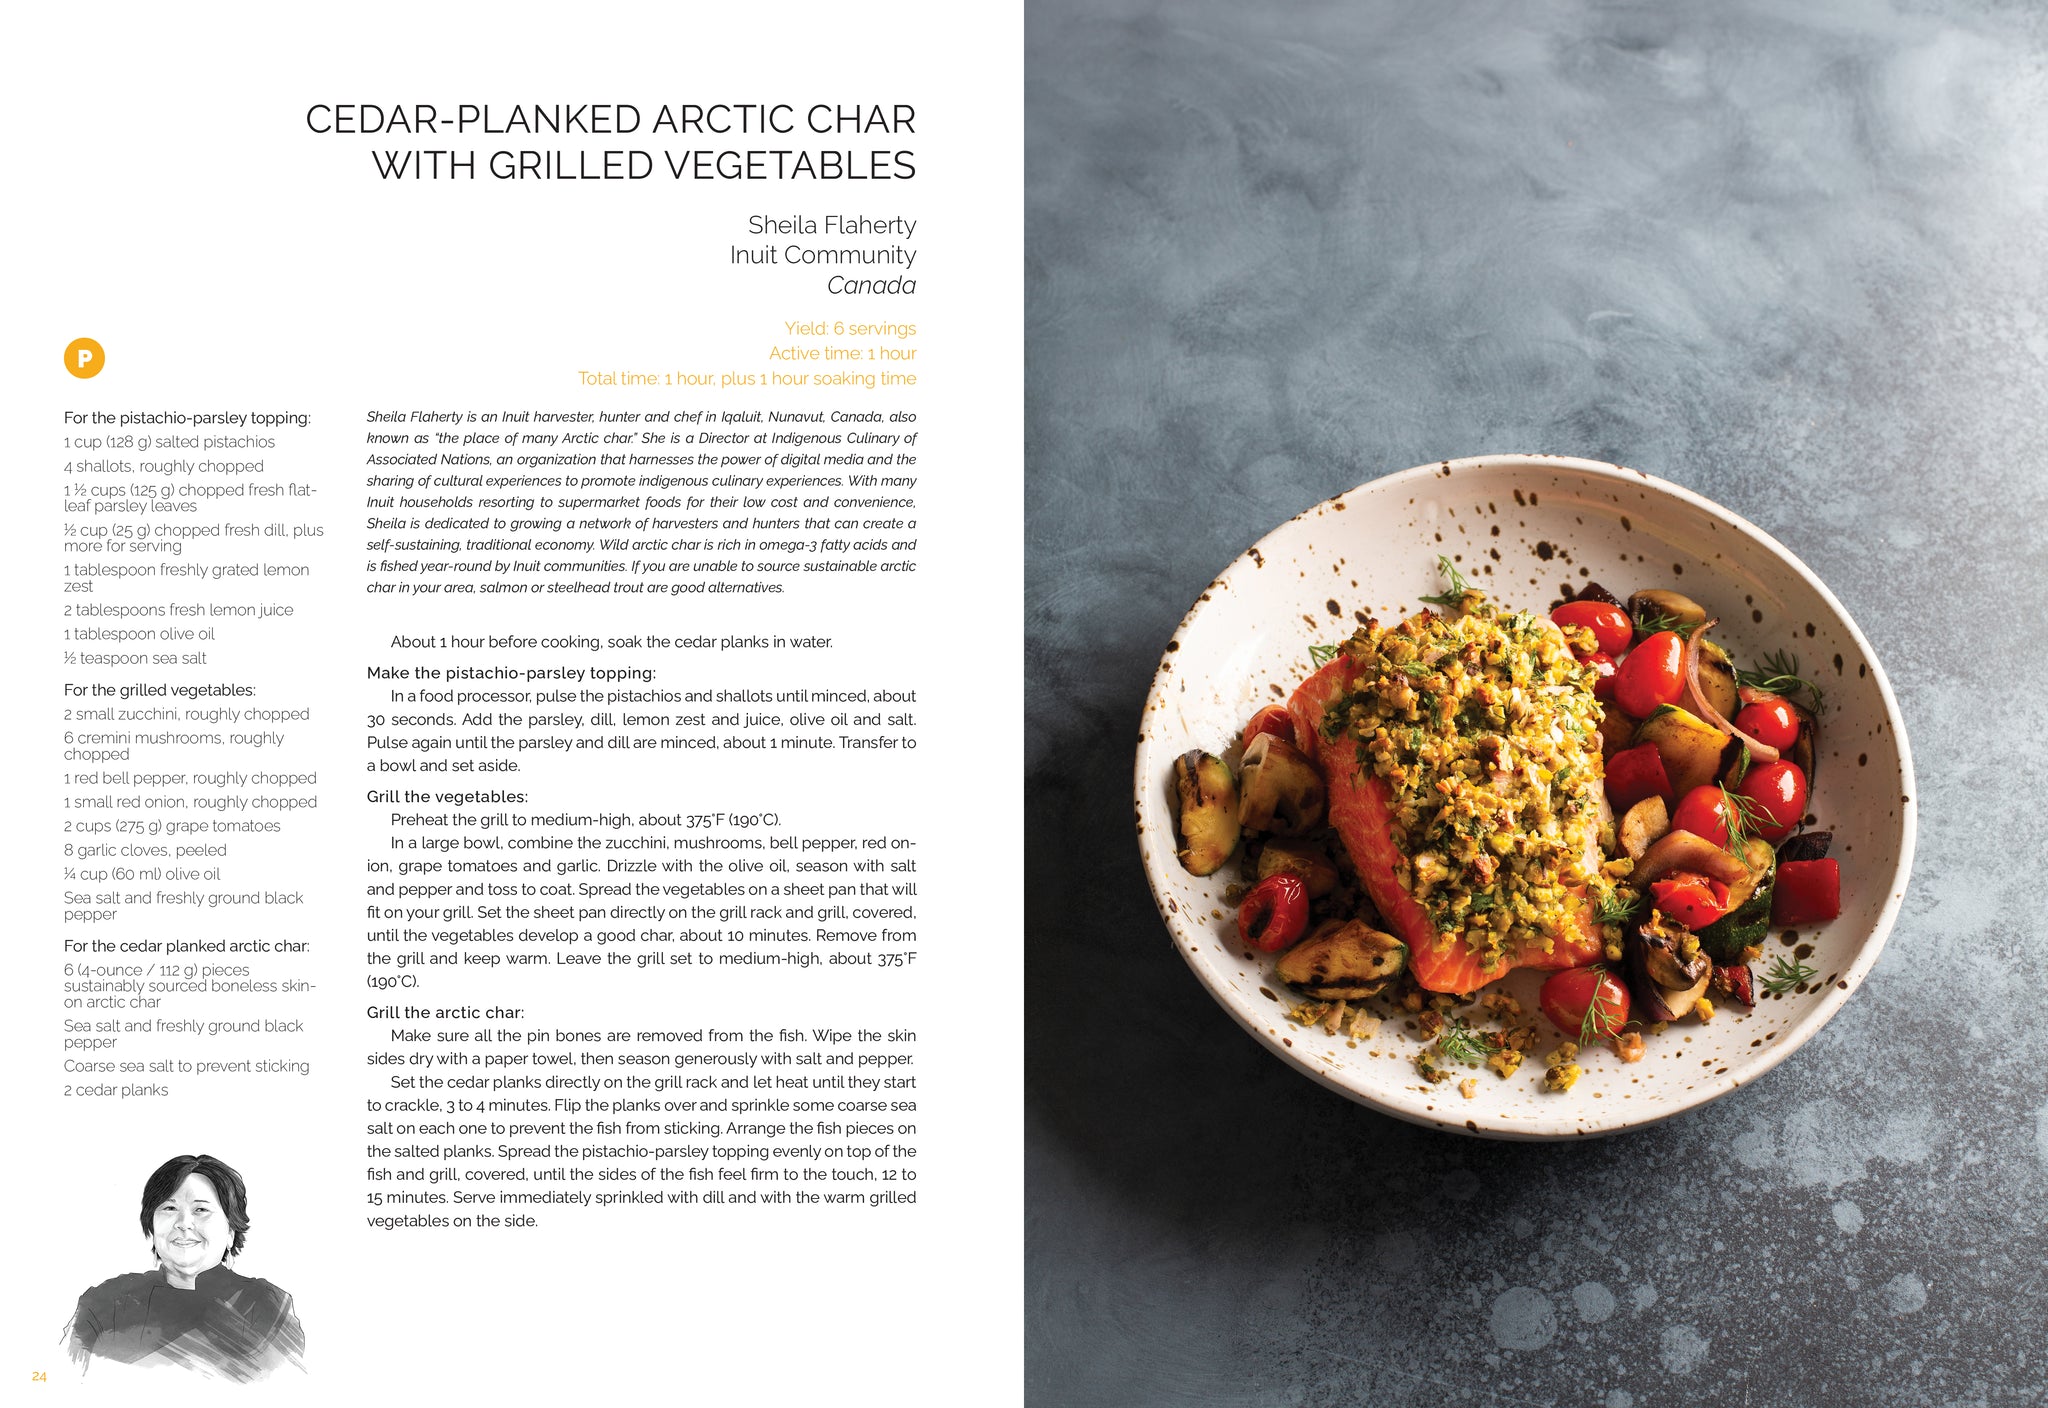 The Cookbook in Support of the United Nations: For People and Planet